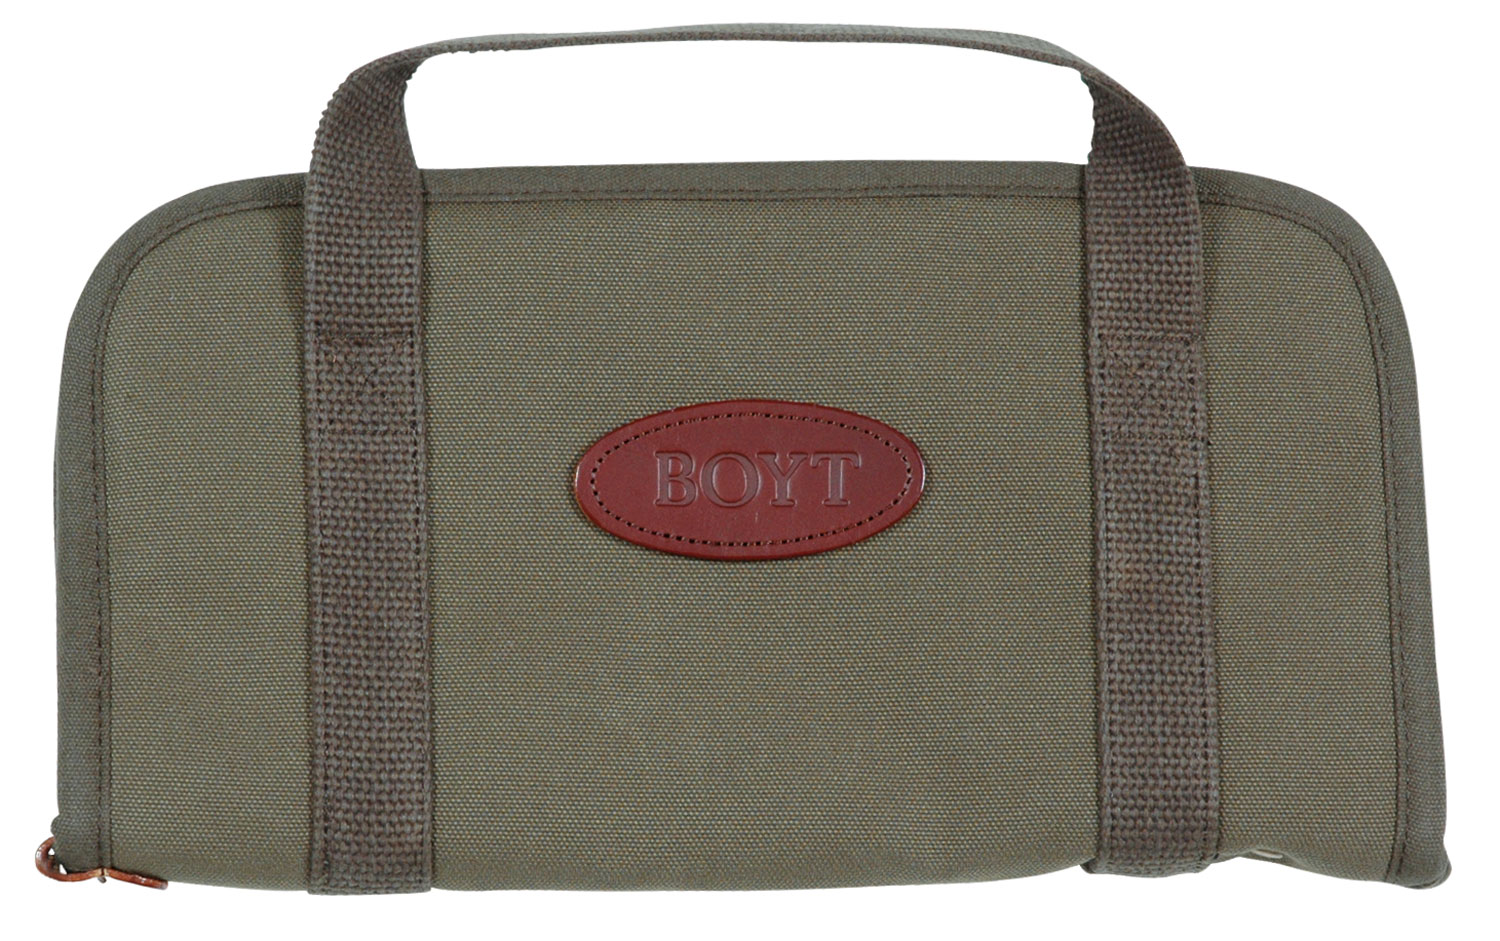 Boyt Harness 0PP650009 Rectangular Pistol Rug made of Waxed Canvas with OD Green Finish, Cotton Batten Padding & Quilted Flannel Lining 13